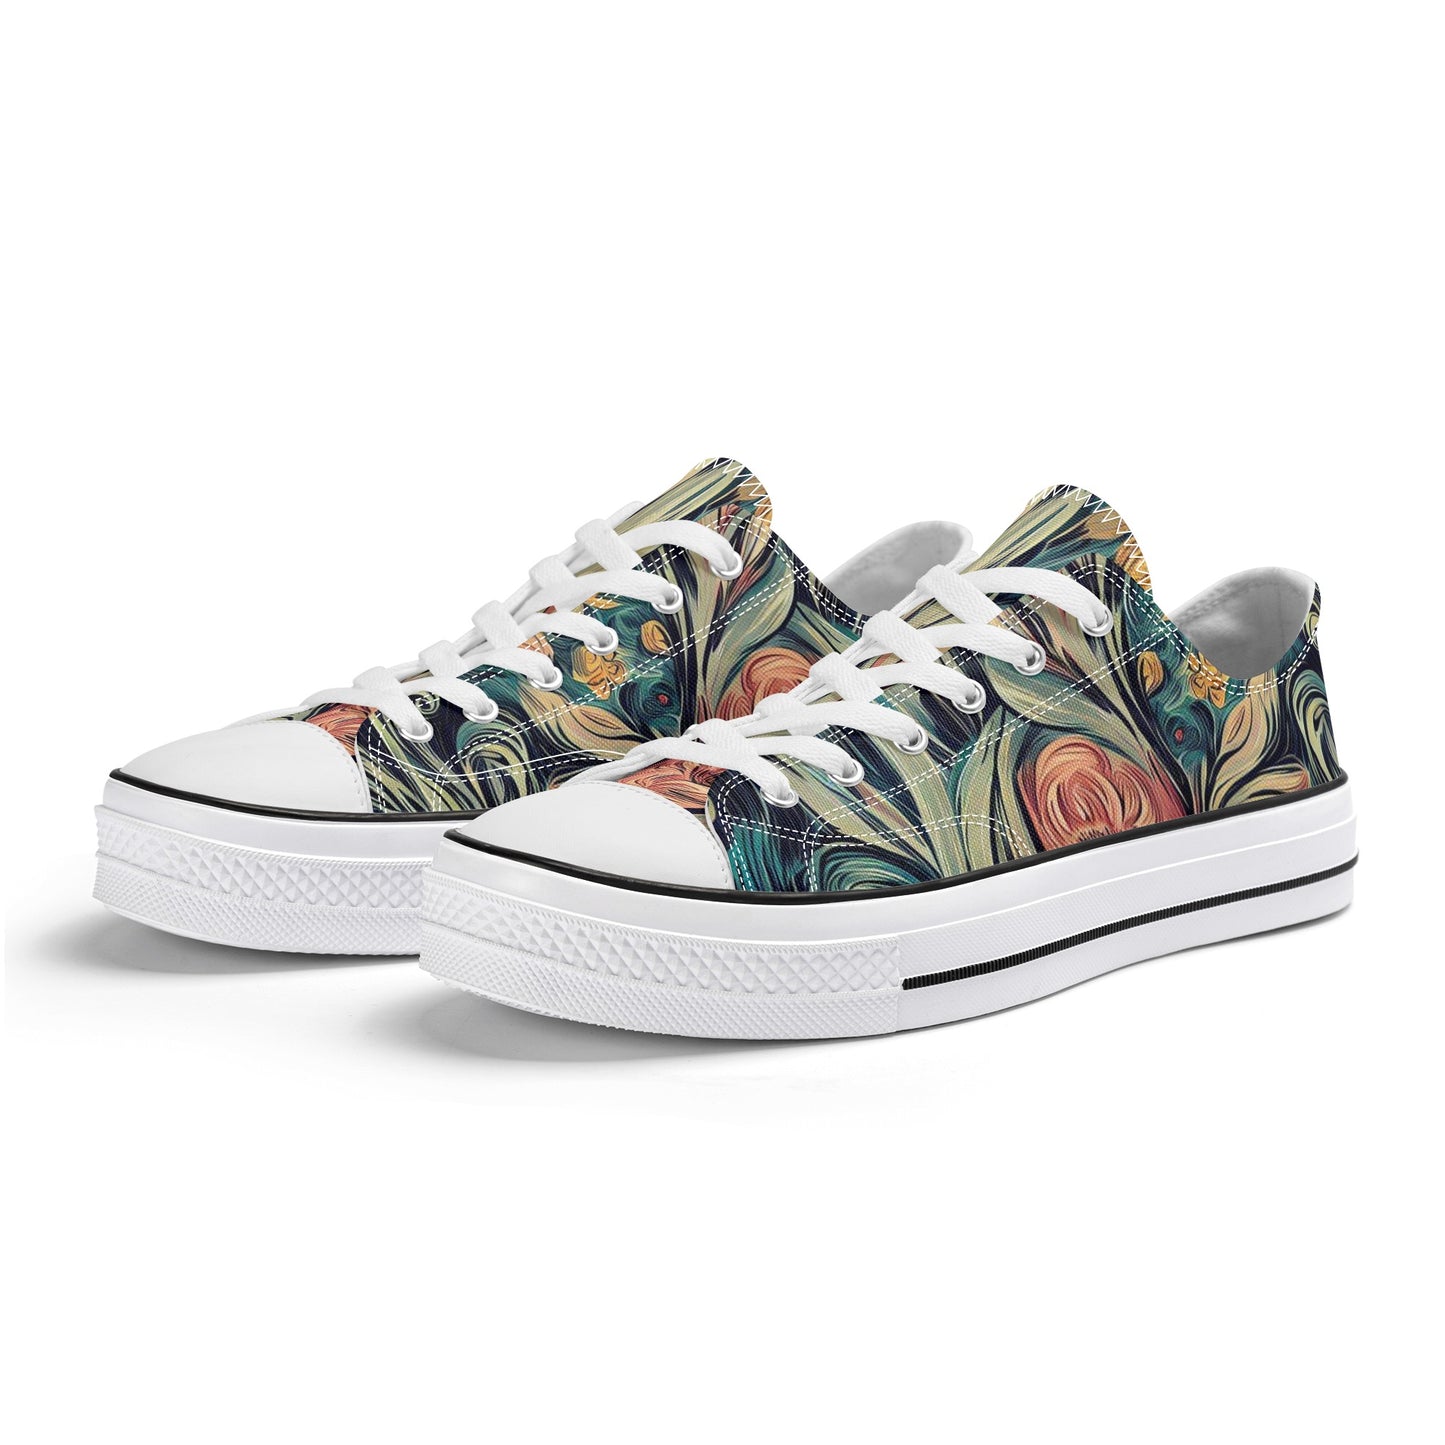 Main Product: Van Gogh Women's Classic Low-Top Canvas Shoes - Front View